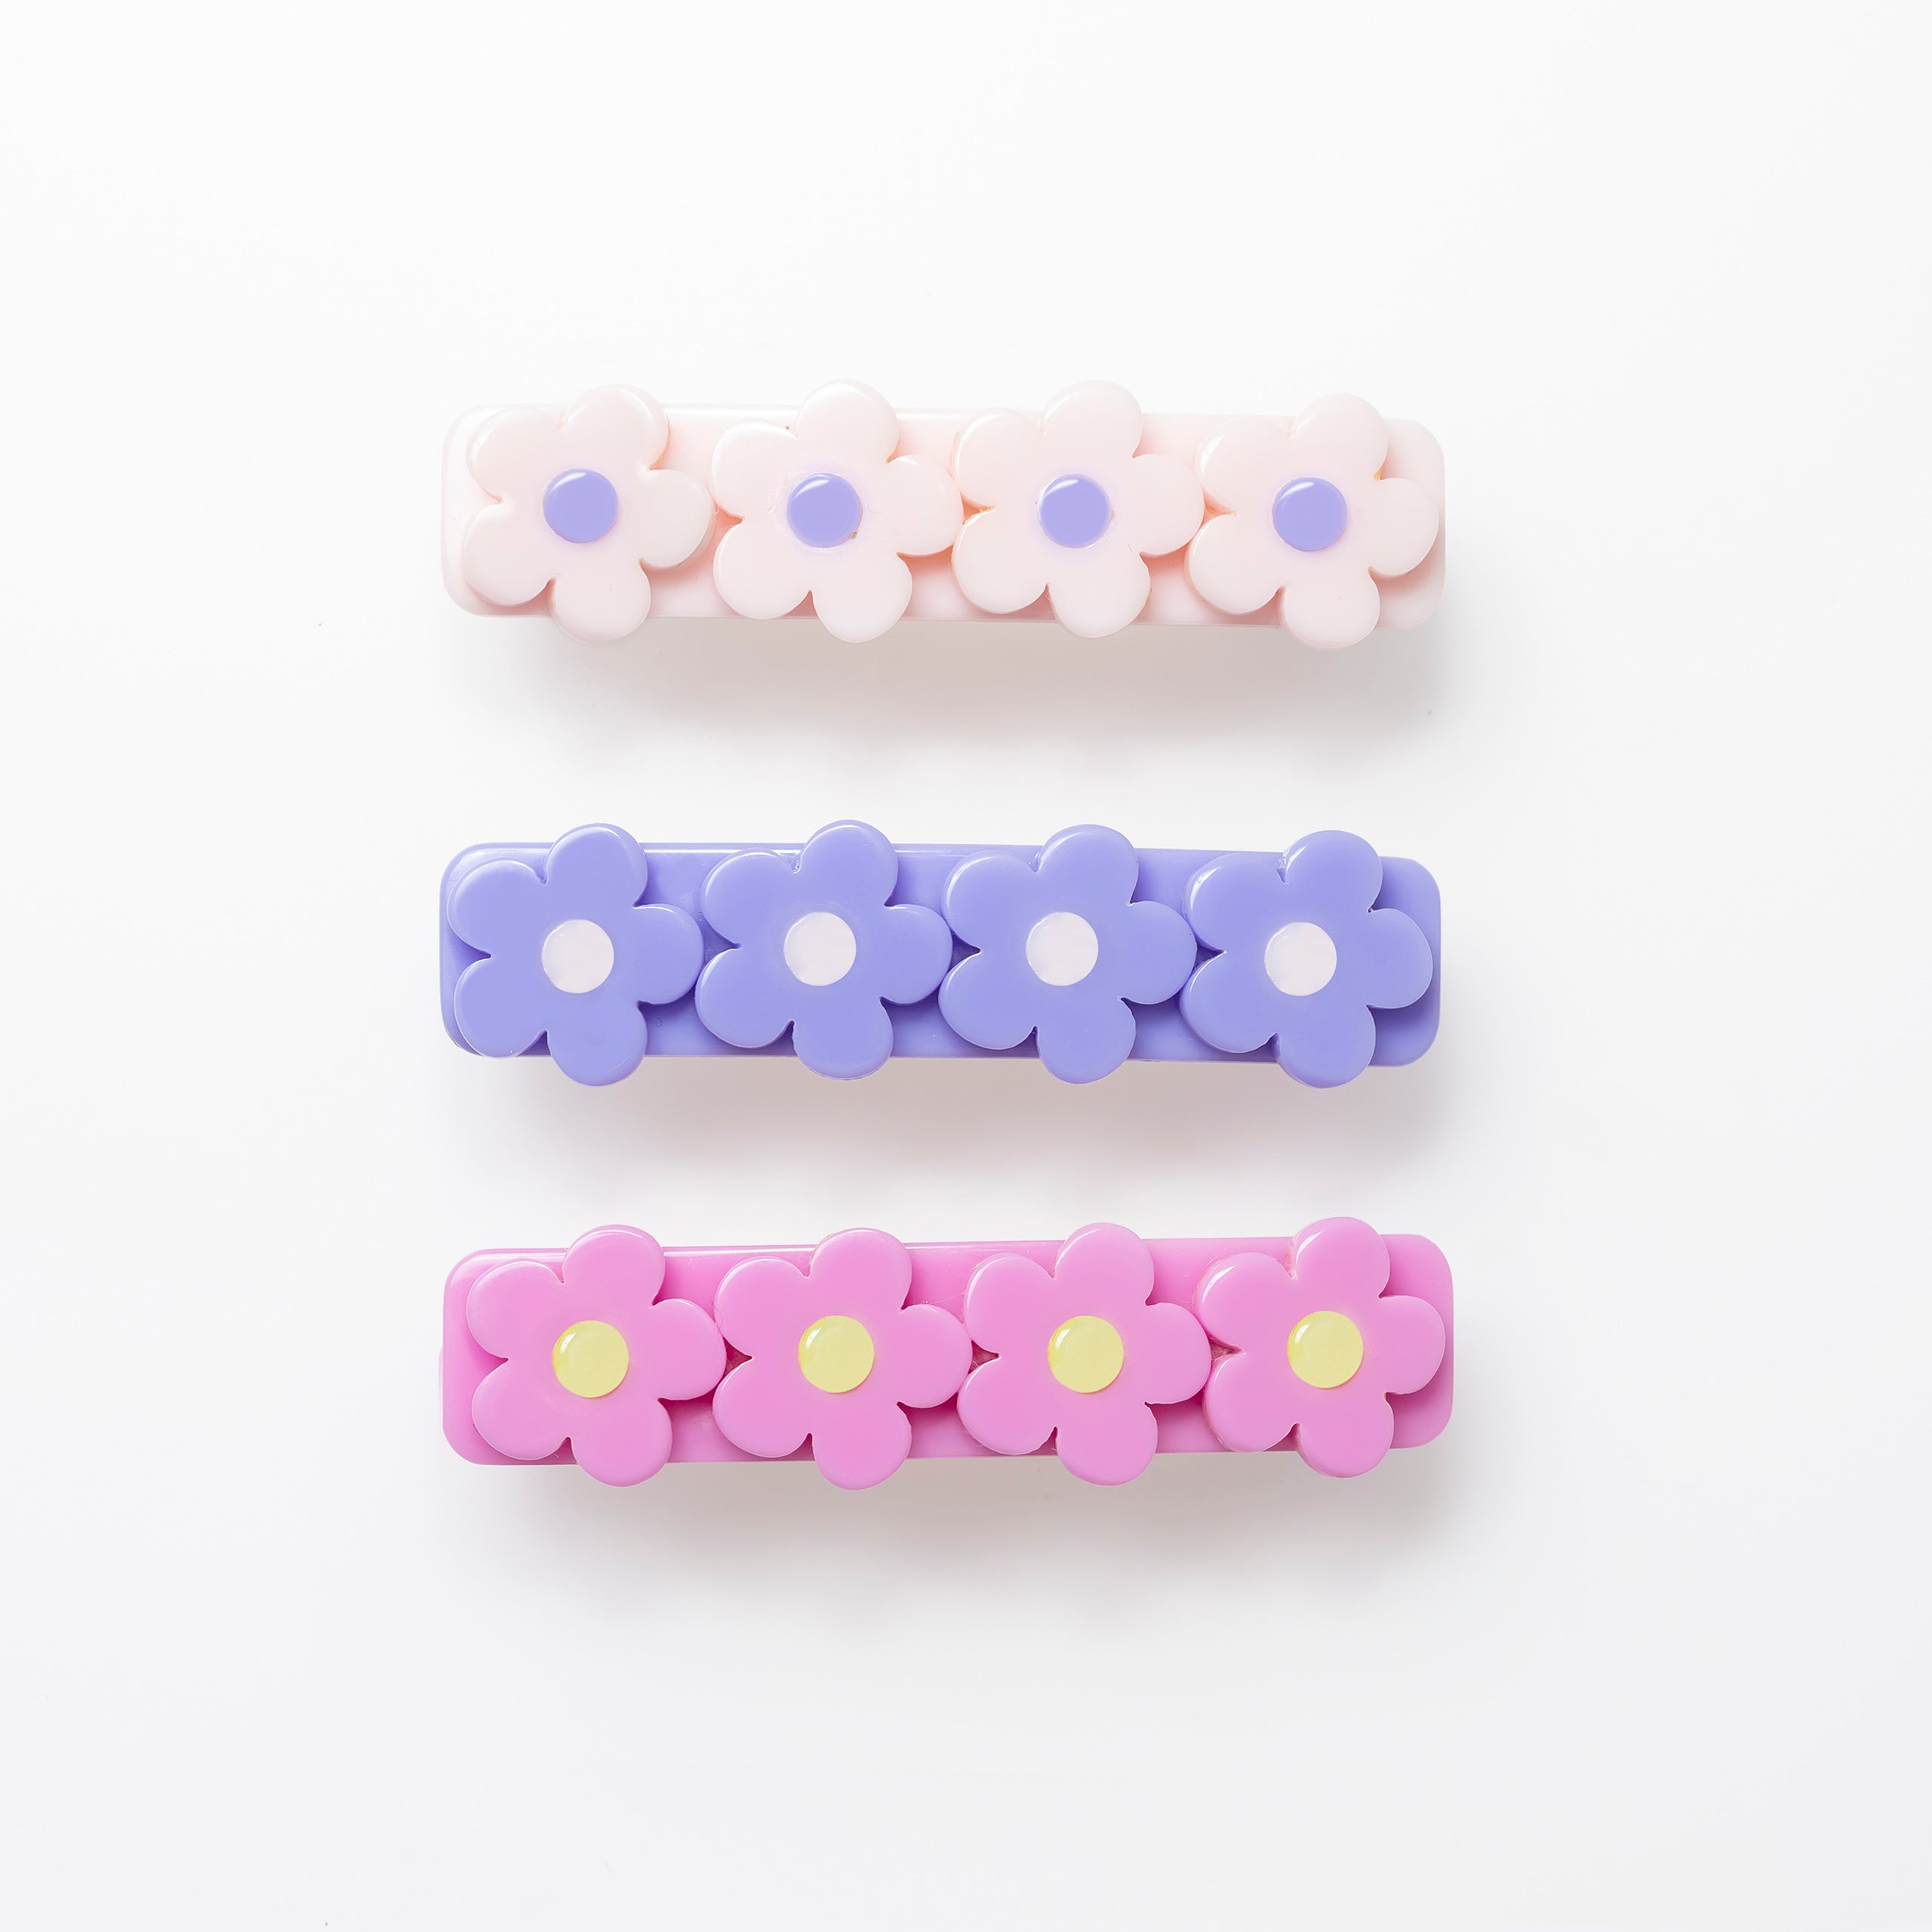 Triple Daisy Orchid Alligator Clips (set of 3)